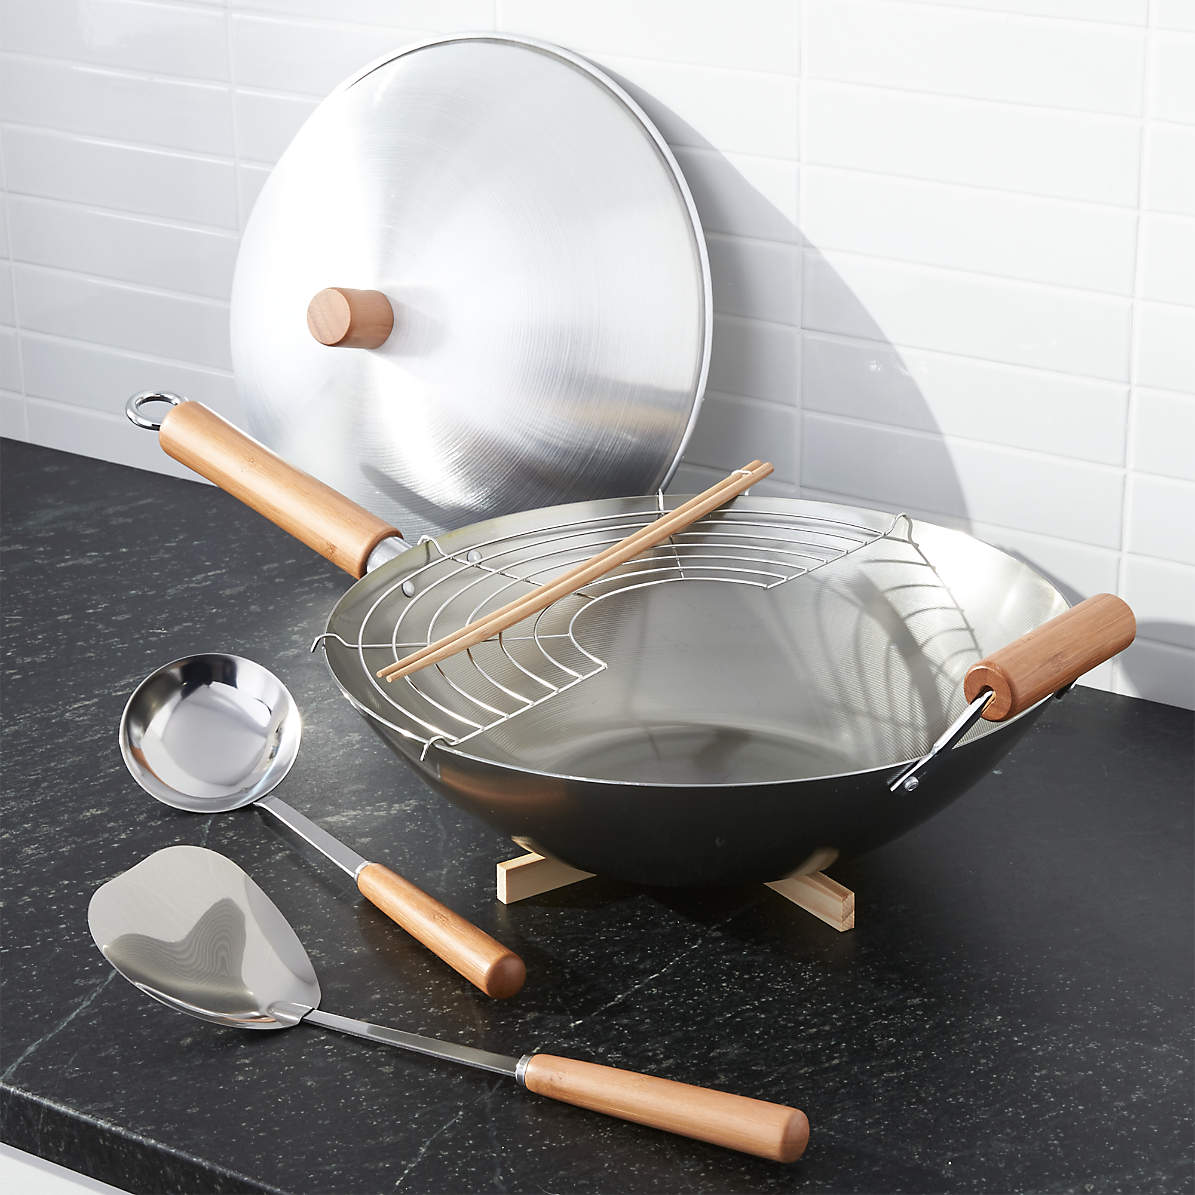 Anyone have experience with this carbon steel wok? On sale at